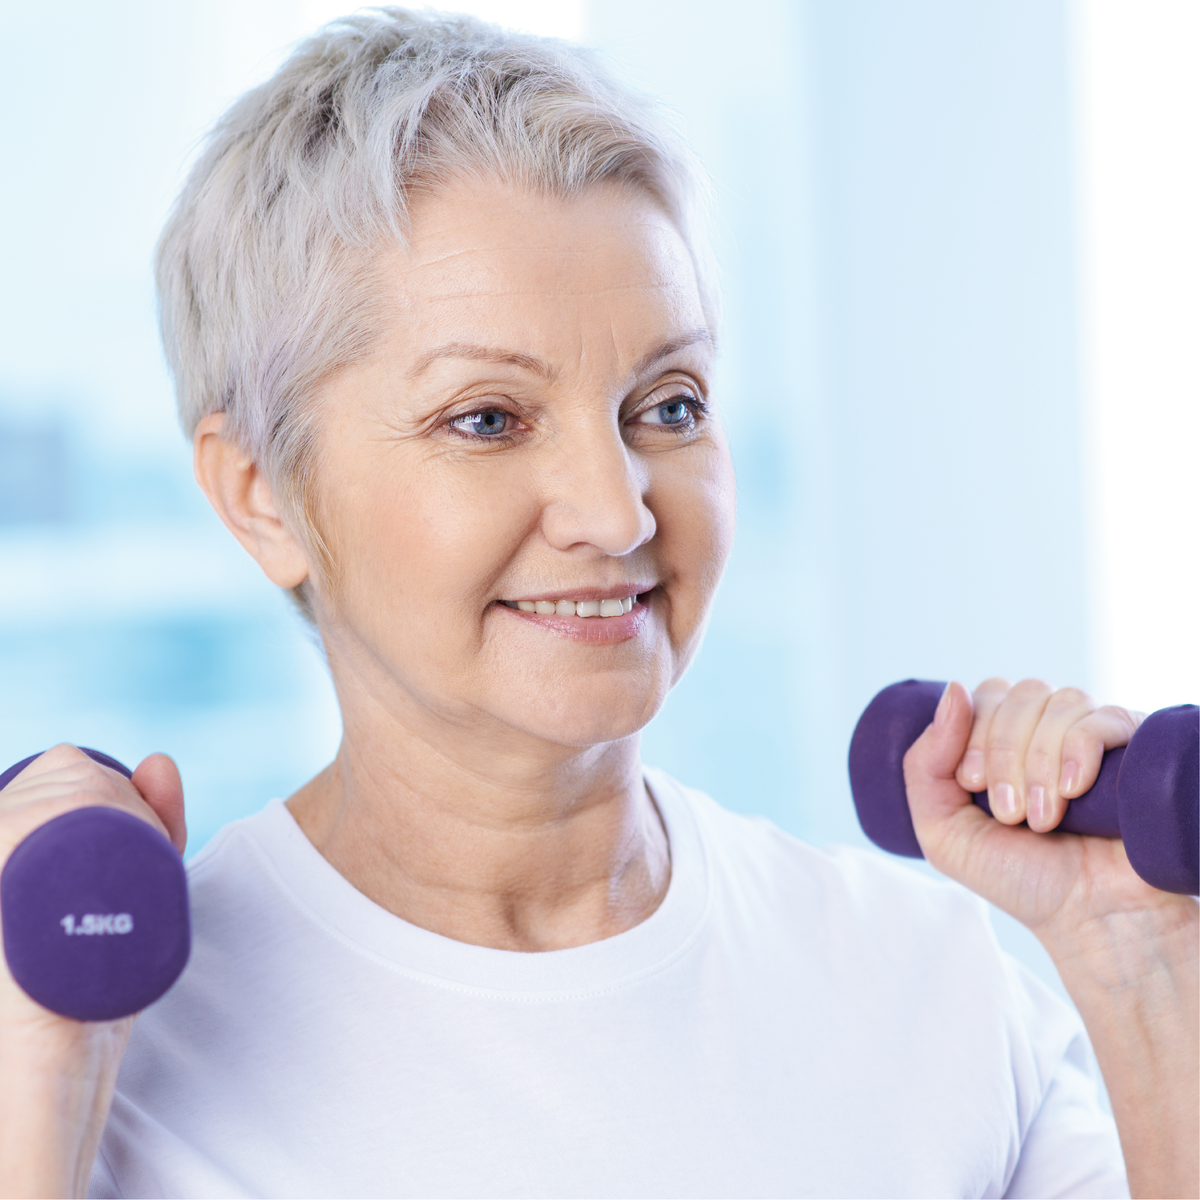 Exercise regularly to keep arthritis pain down